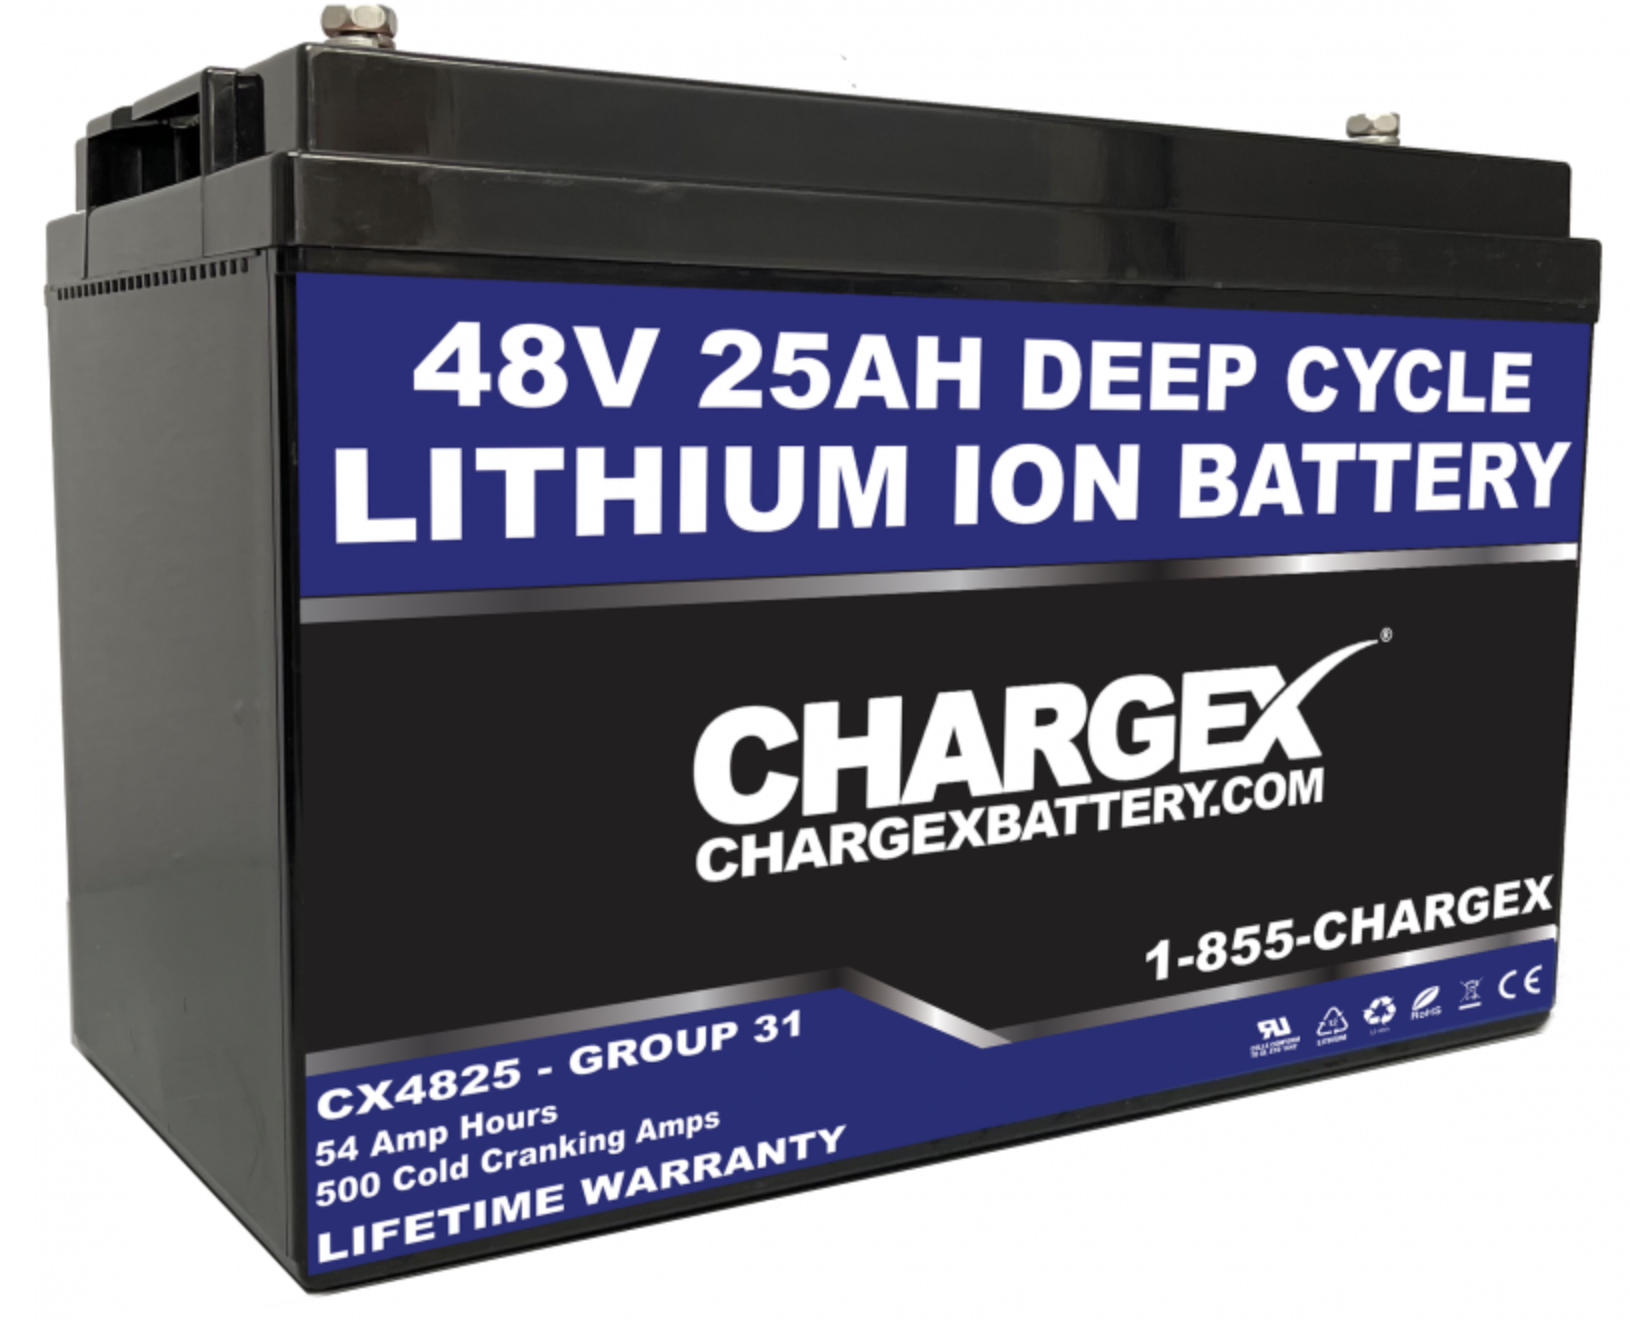 CHARGEX® 48V 25AH Deep Cycle Lithium Ion Battery